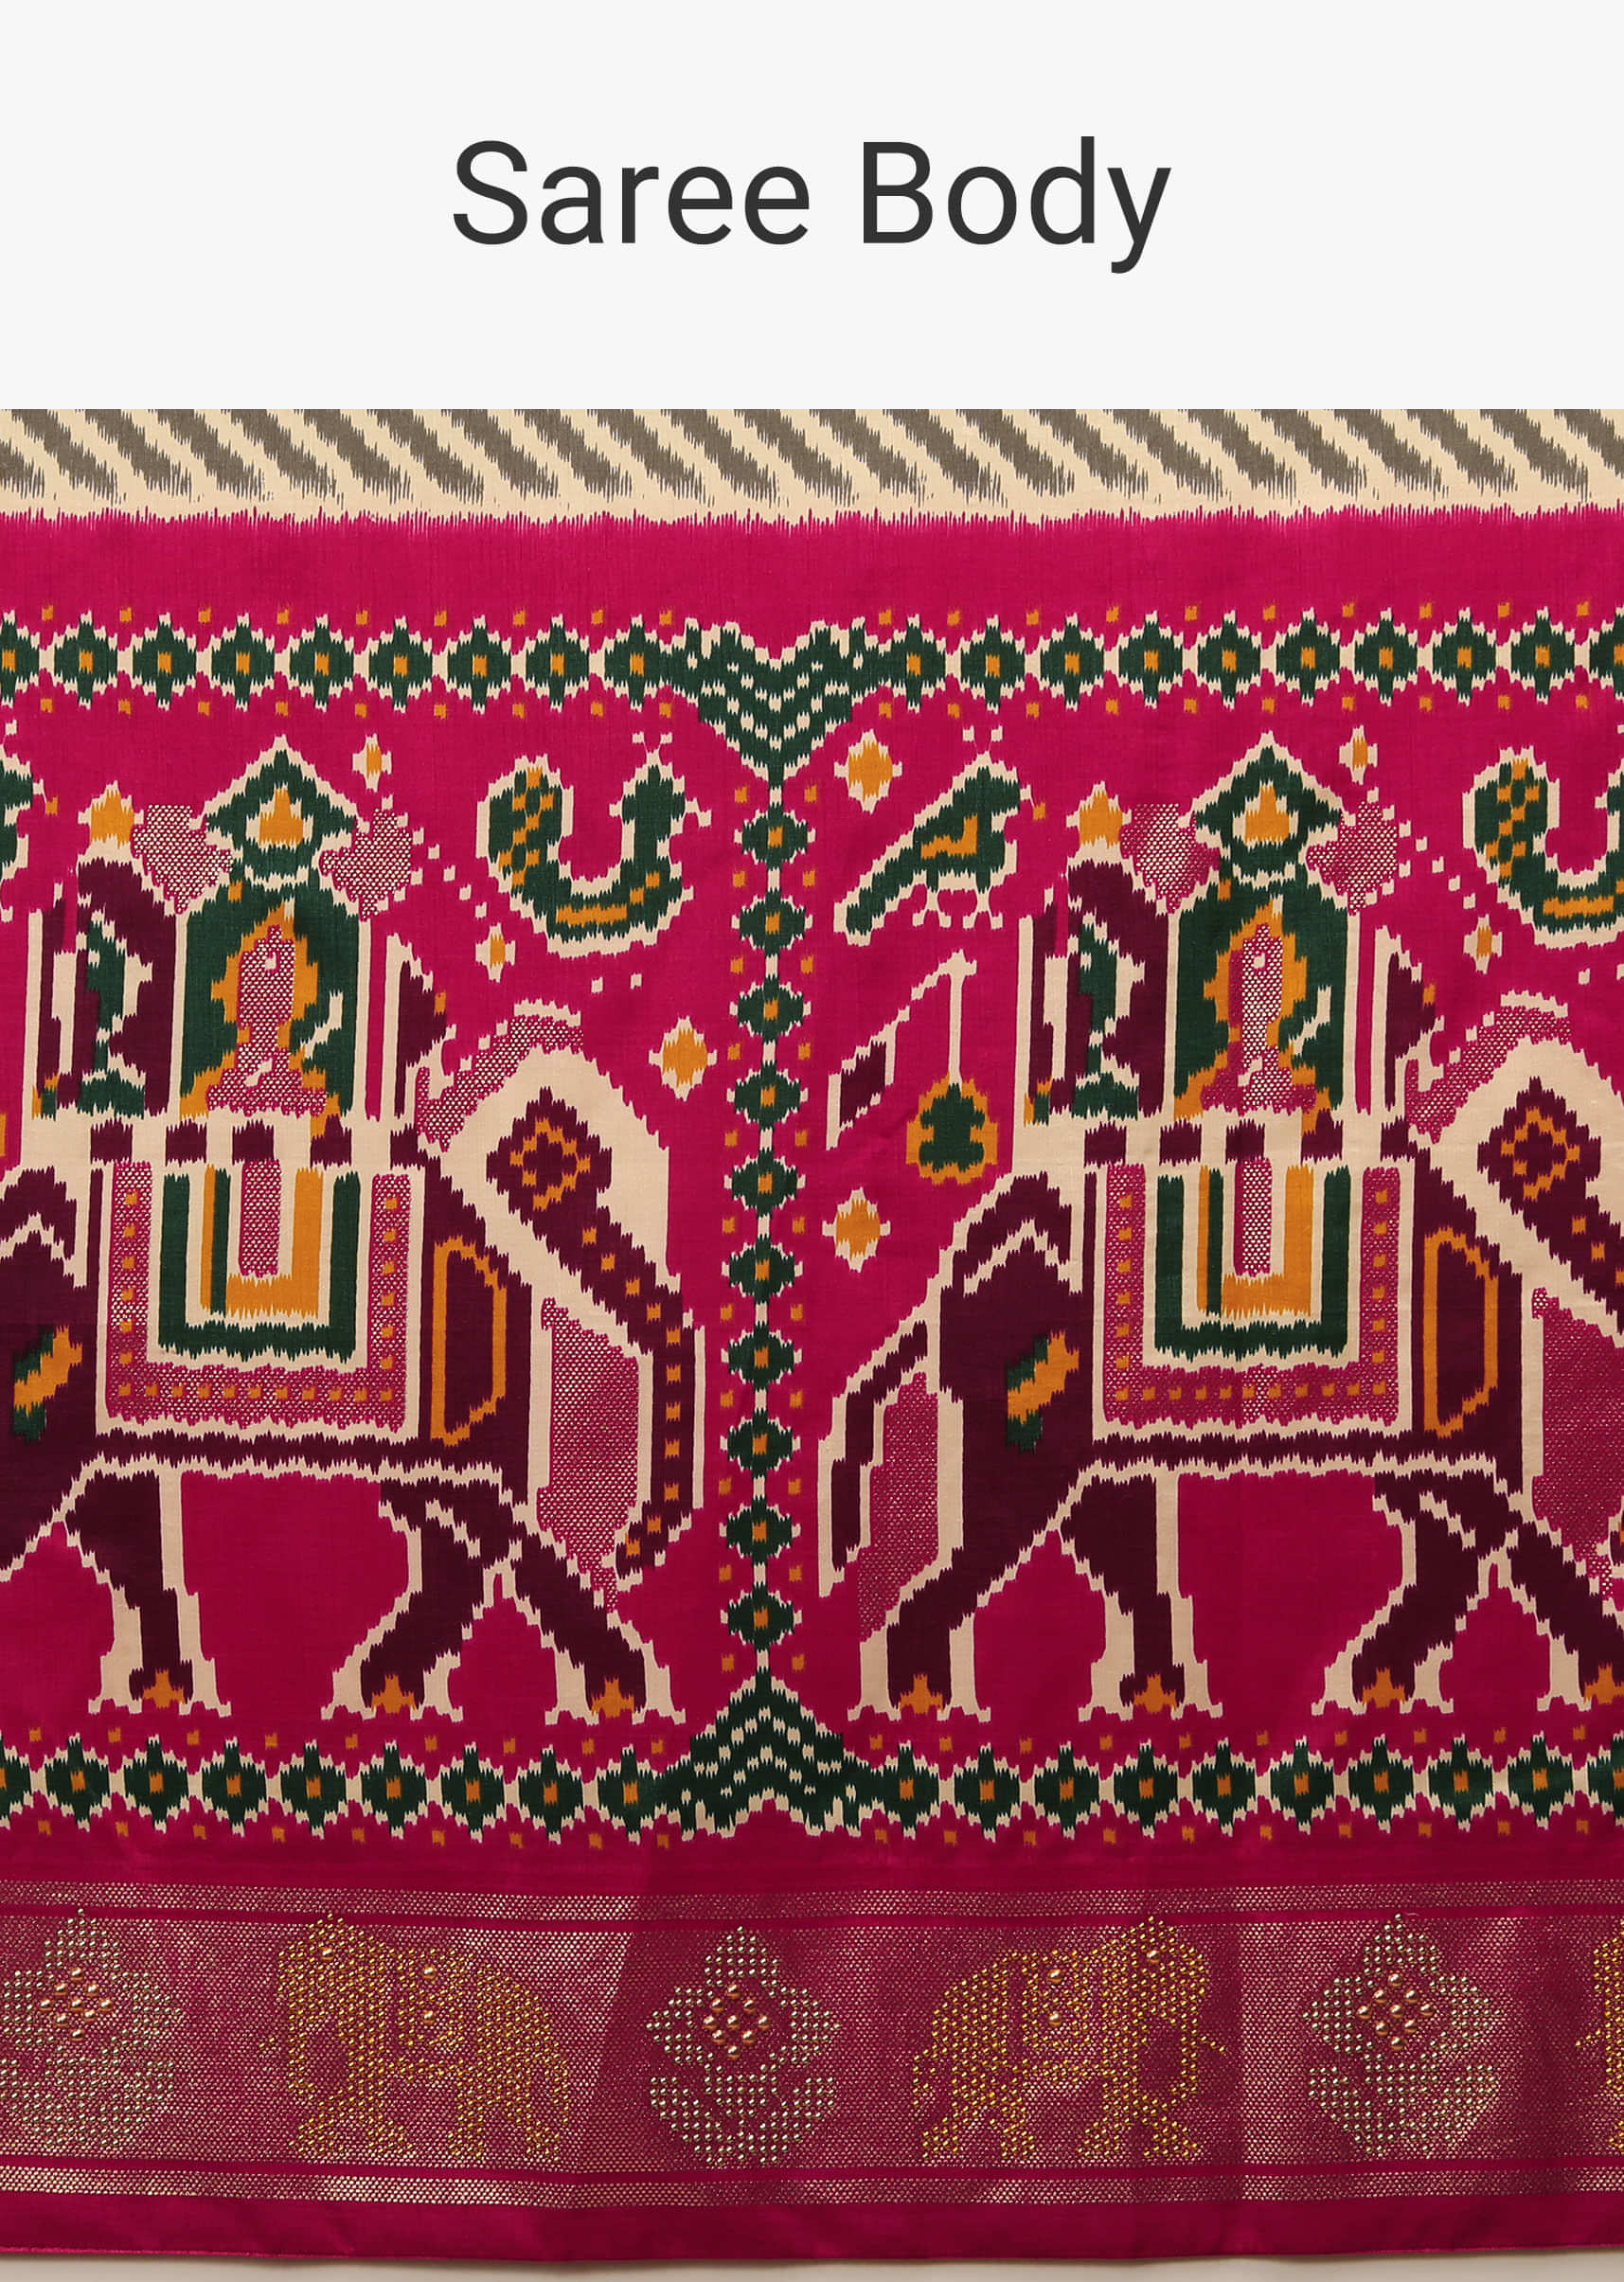 Rani Pink Patola Saree In Soft Silk With Brown And White Stripes And Stick On Kundan Work  